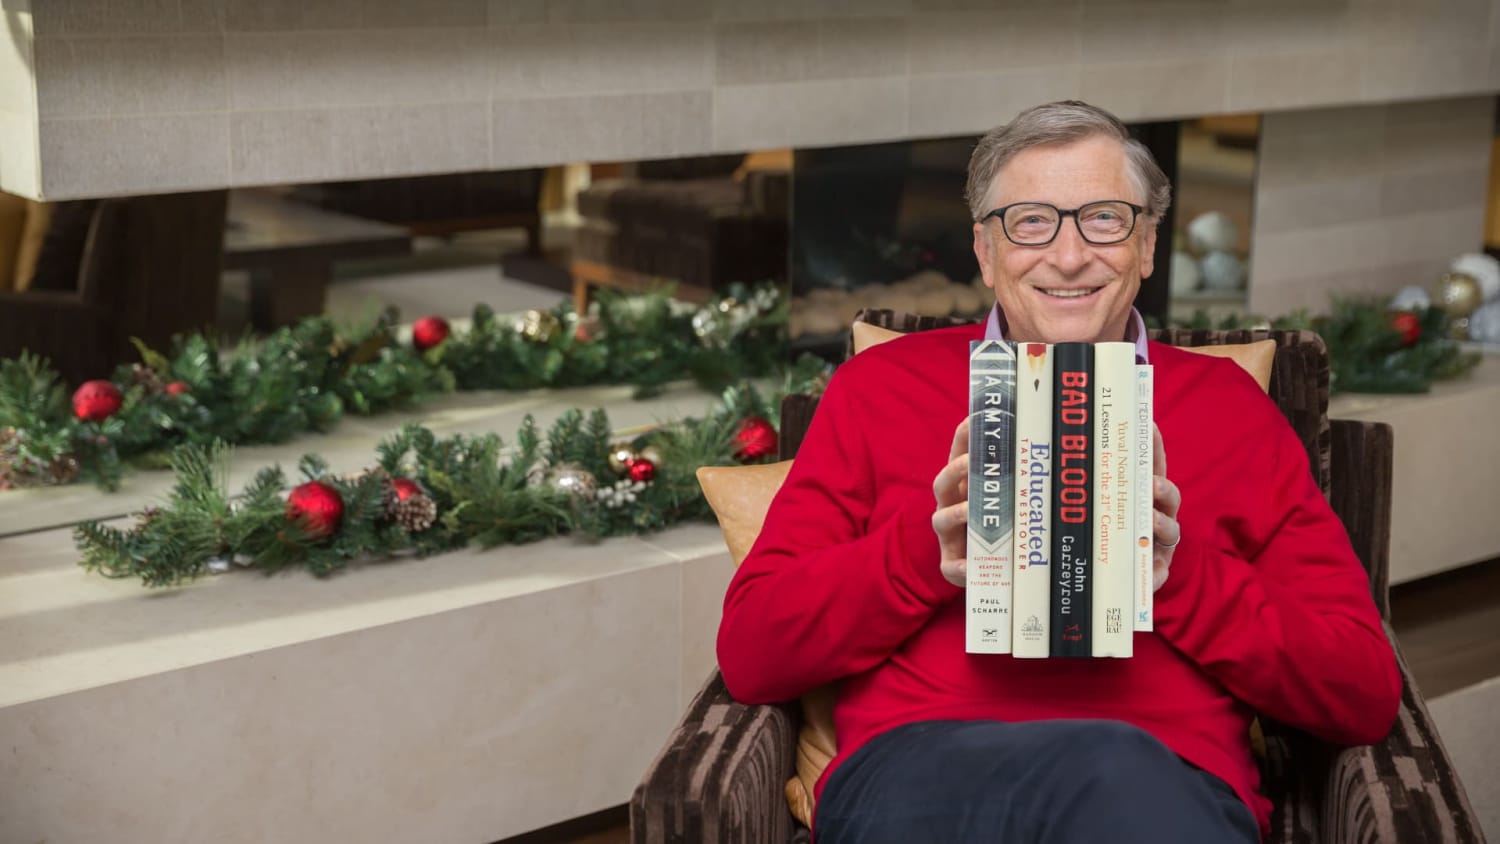 Bill Gates says these are the 5 best books he read in 2018